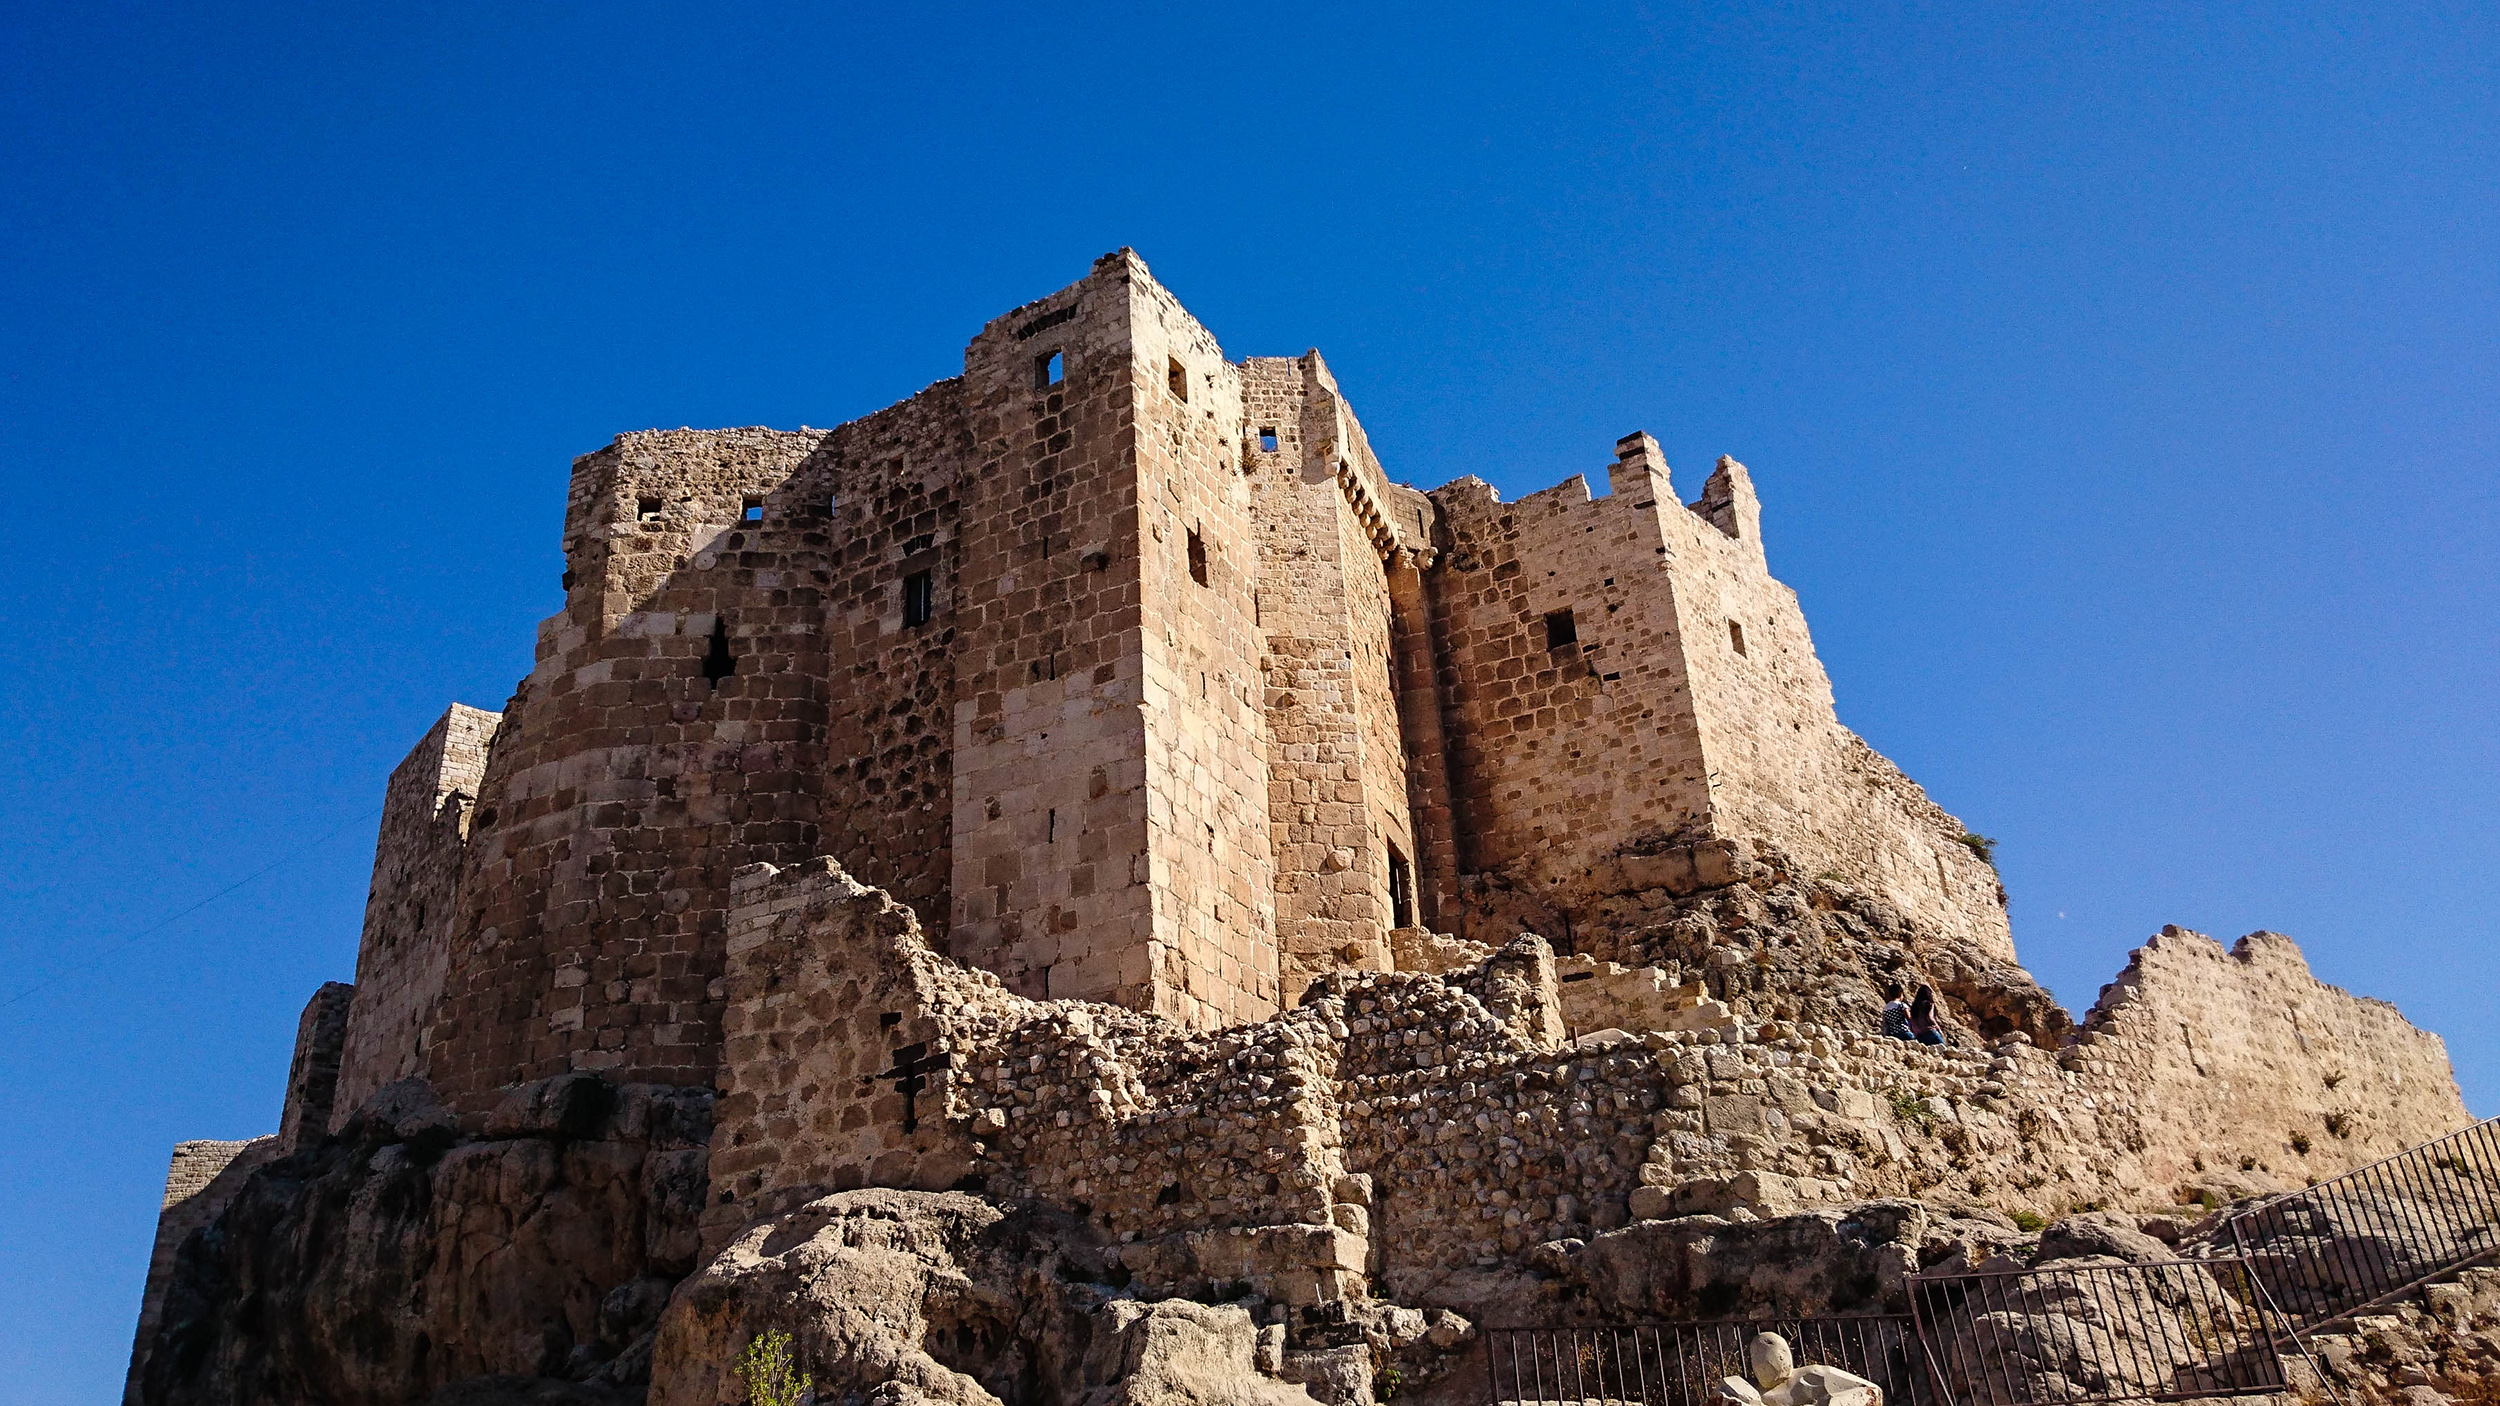 An ancient castle perches majestically atop a towering rock, under the expanse of a vivid blue sky.